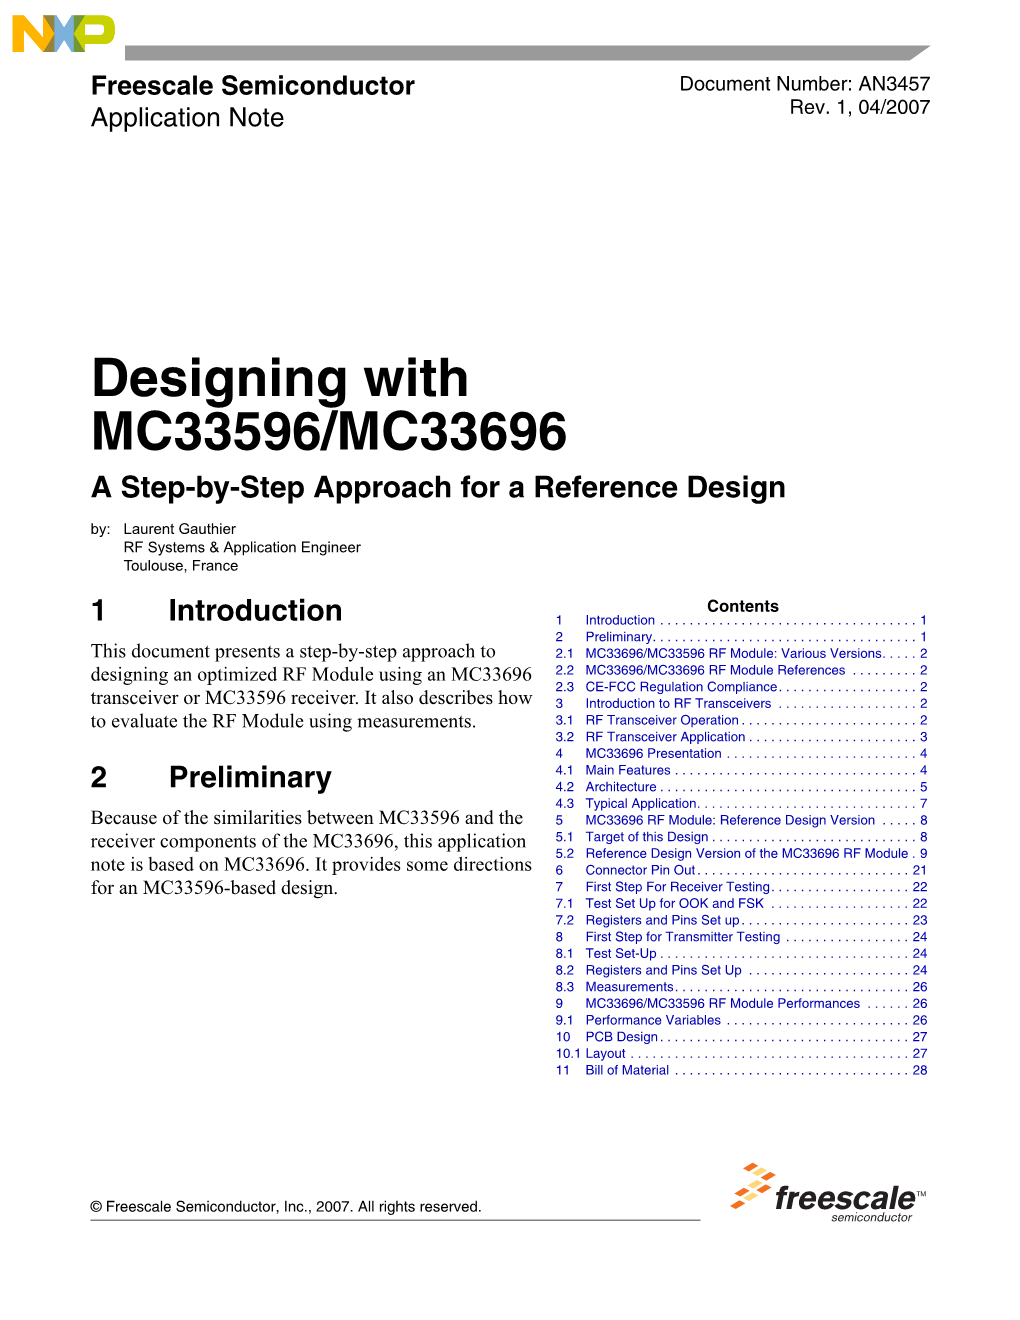 Designing with MC33596/MC33696 a Step-By-Step Approach for a Reference Design By: Laurent Gauthier RF Systems & Application Engineer Toulouse, France